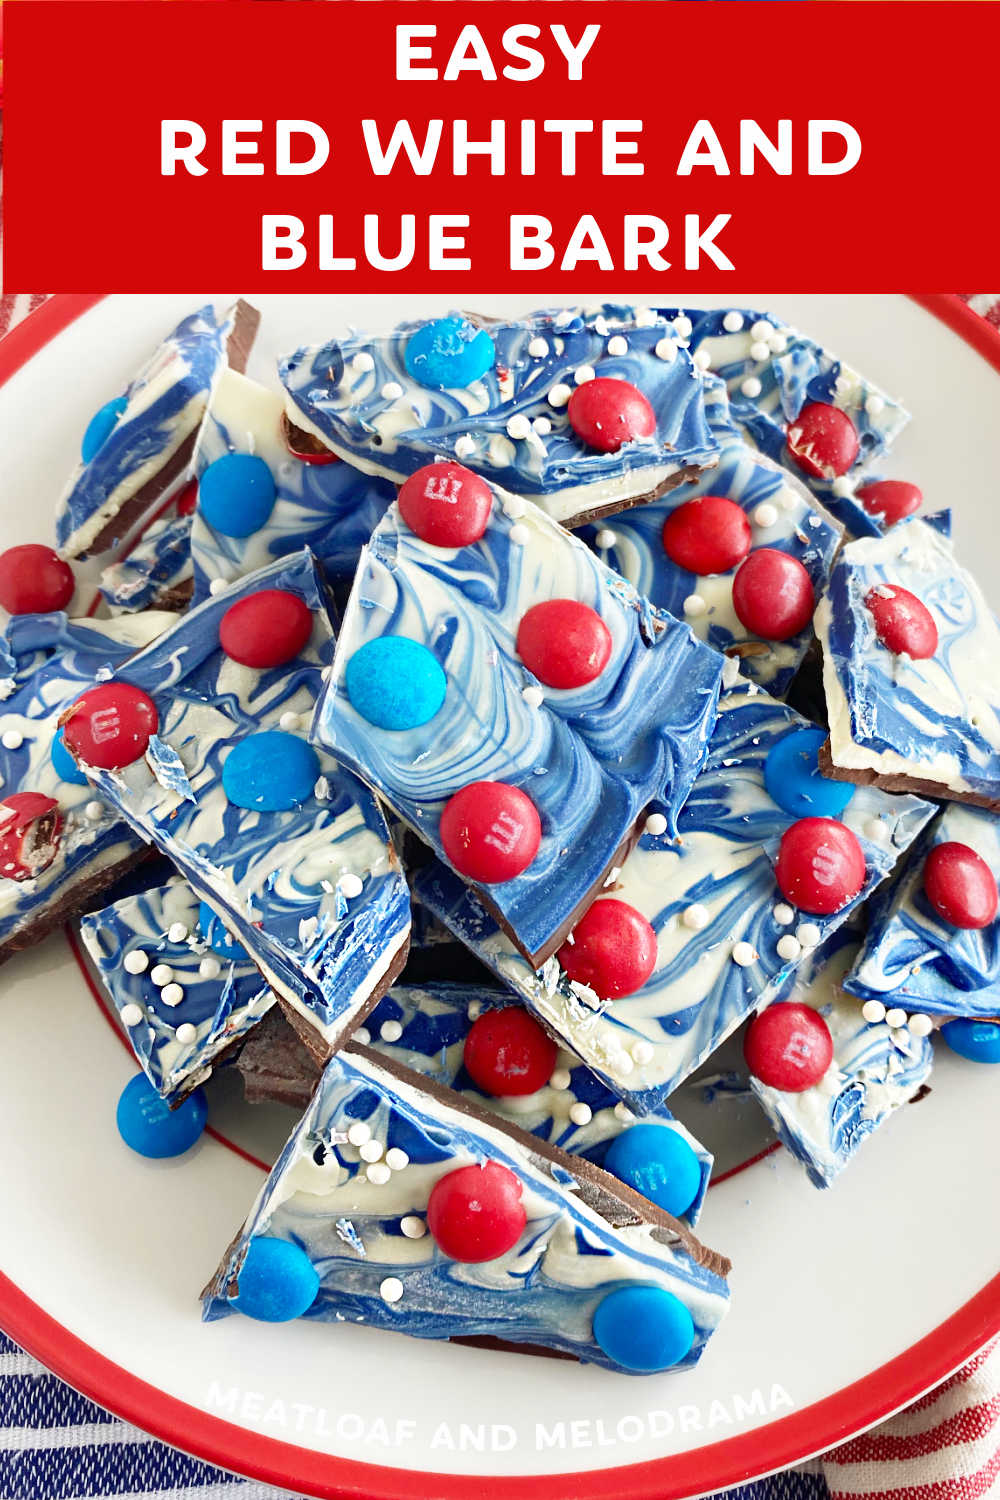 Red white and blue bark is a super easy no bake dessert recipe that is perfect for patriotic holidays like Memorial Day and Fourth of July. You can make this festive candy bark in just a few minutes, and it's perfect for summer cookouts and potlucks or sharing with friends and neighbors! via @meamel